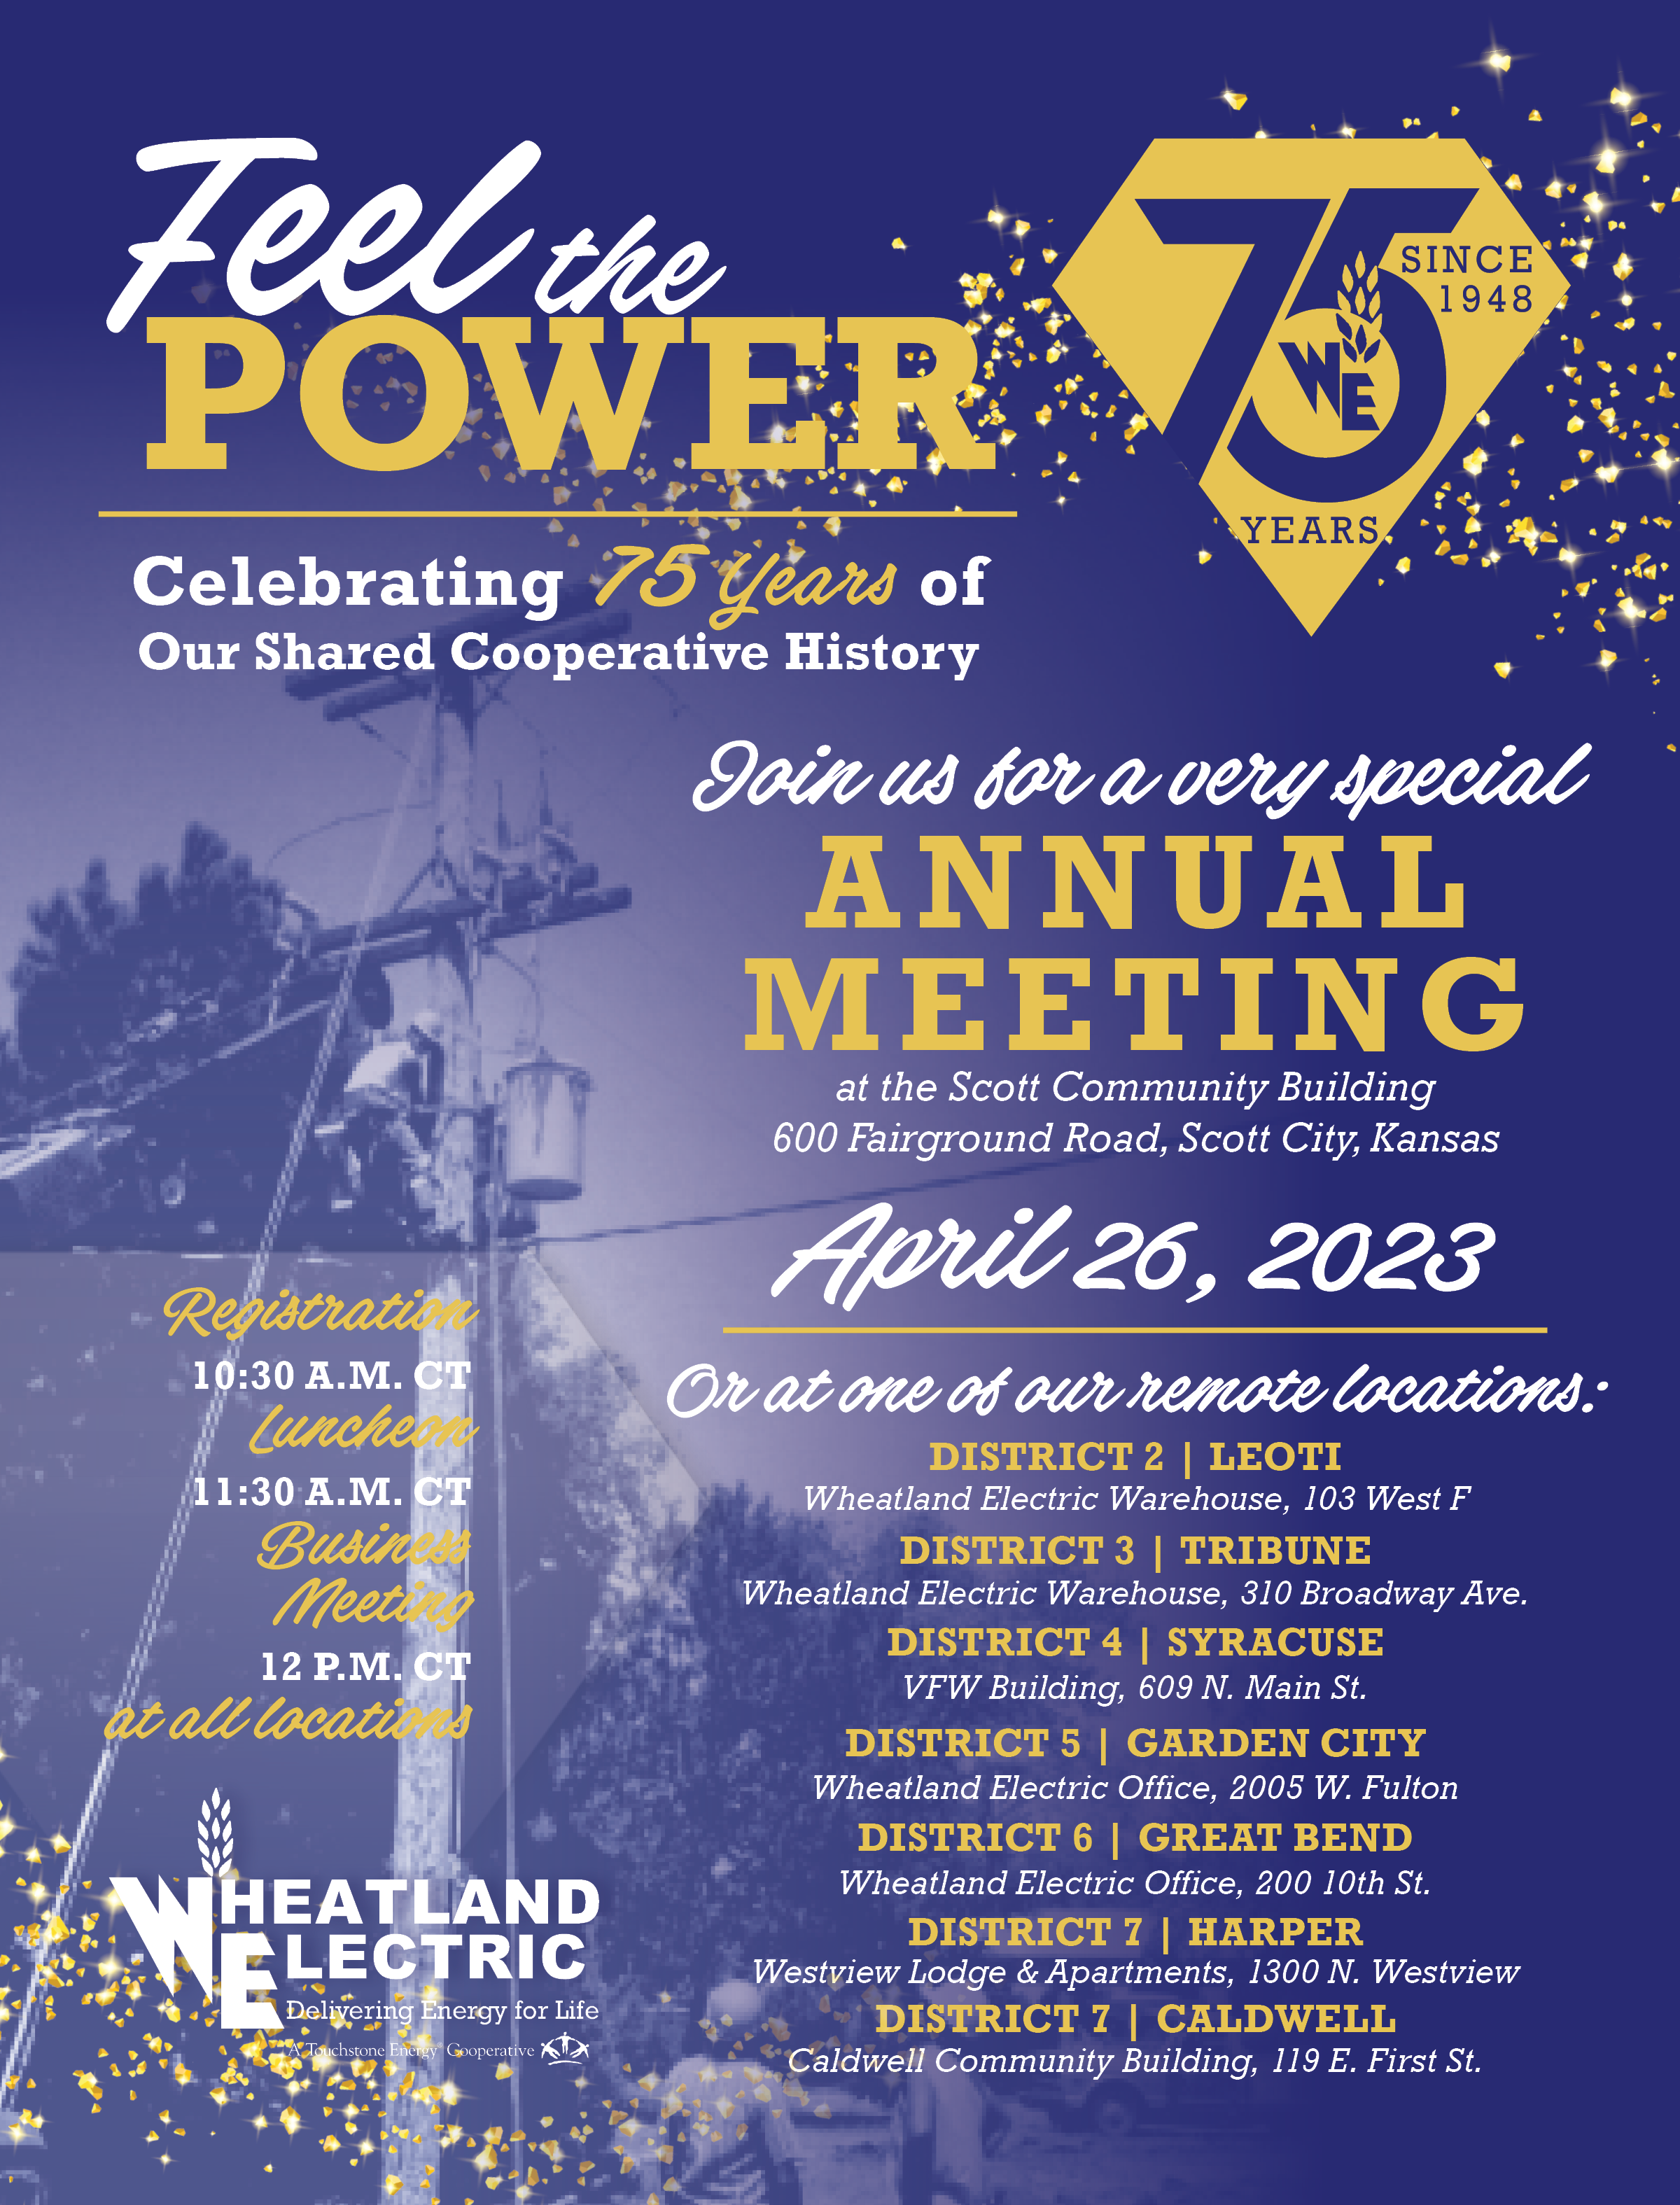 Feel the Power With Us at This Year's Annual Meeting on April 26